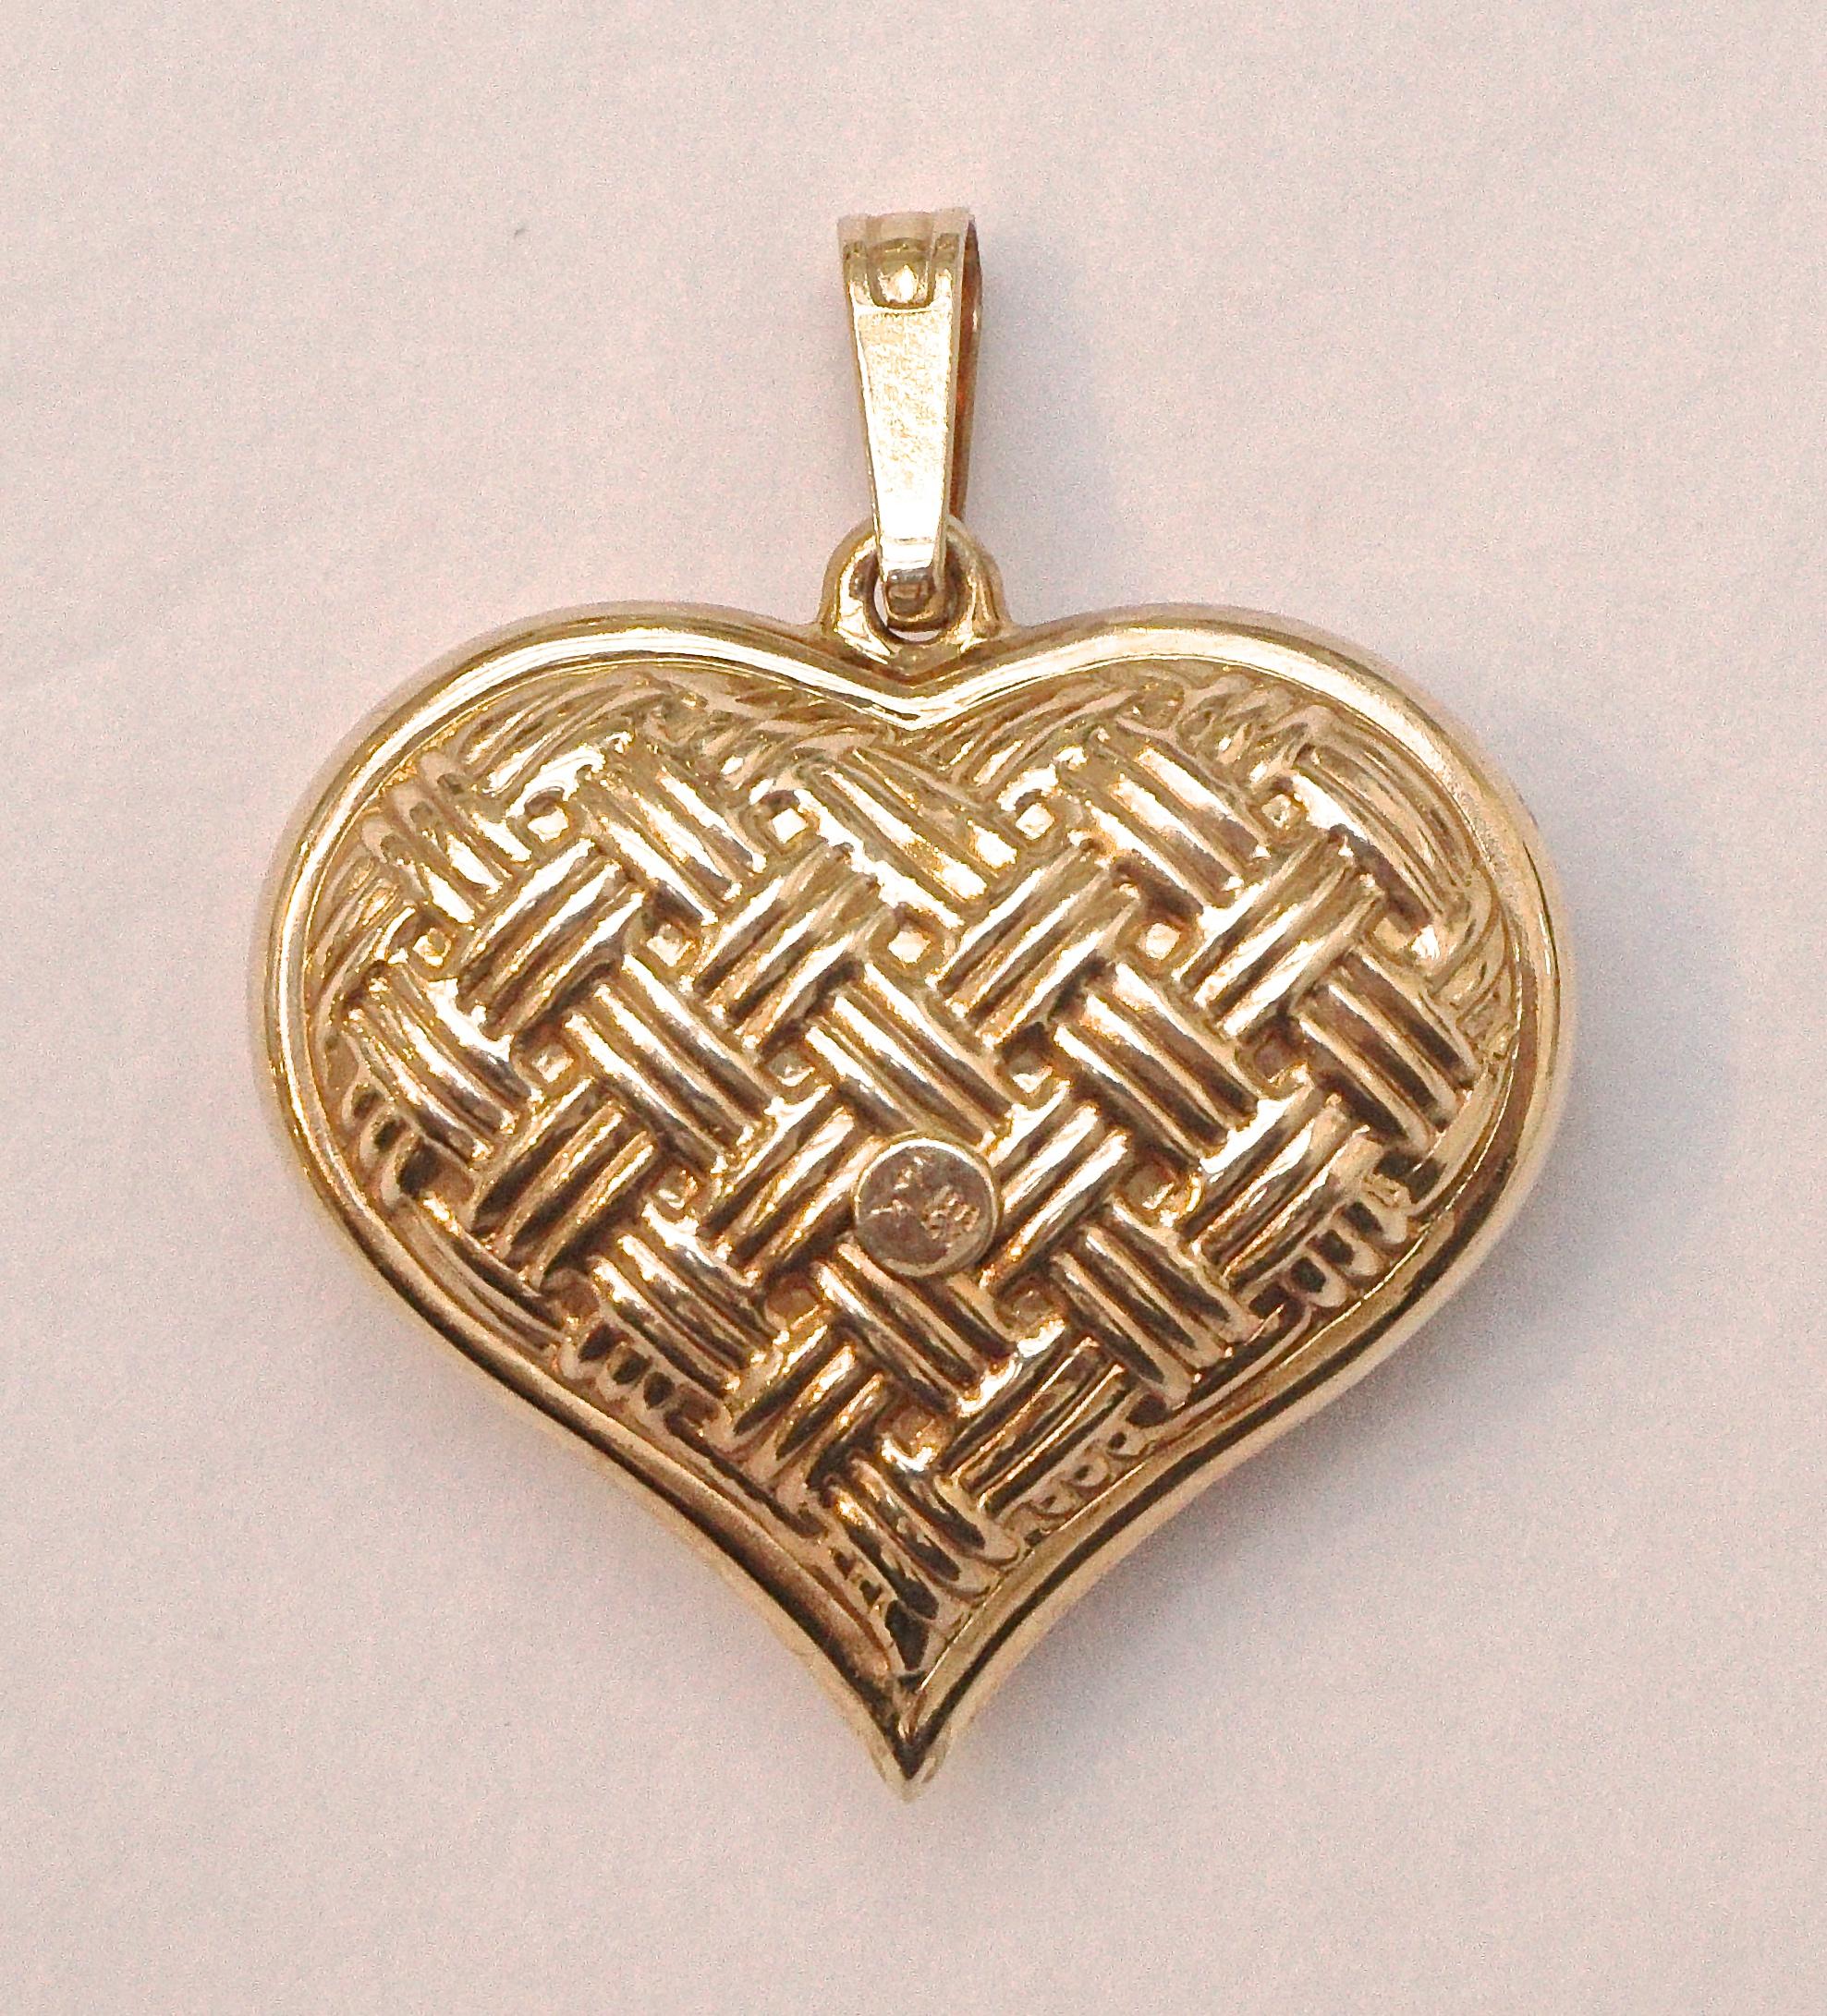 EternaGold 14K gold heart pendant in a lovely basket weave design, which is on both sides. Maximum width 2.25cm / .88 inches by length 1.9cm / .75 inch. The pendant is in very good condition.

This is a beautiful and stylish vintage gold heart